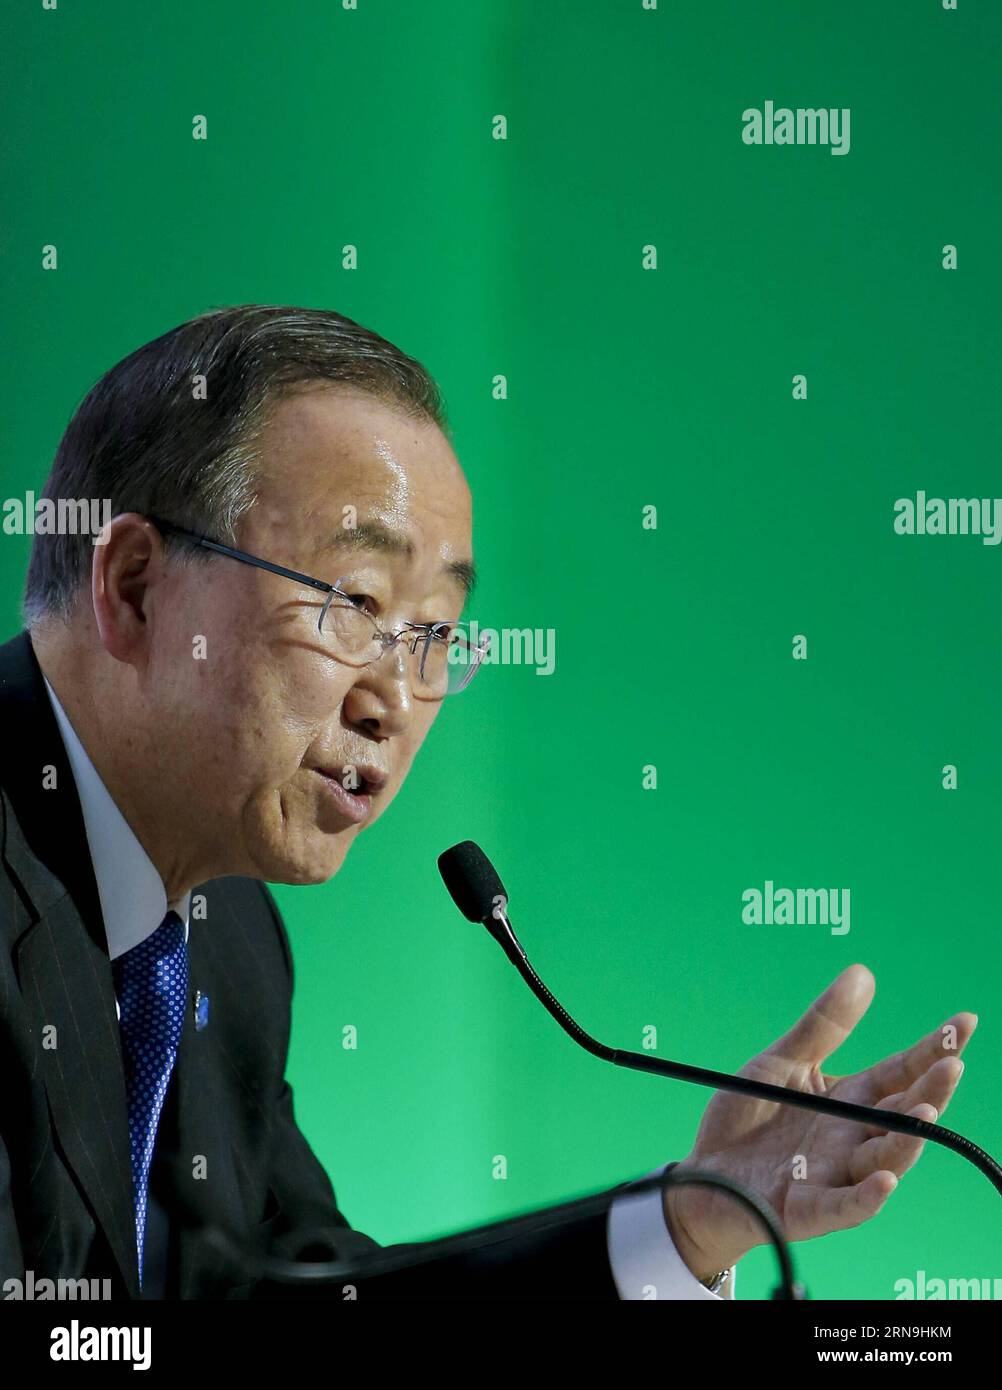 (151207) -- PARIS, Dec. 7, 2015 -- UN Secretary-General Ban Ki-moon speaks at a press conference during Paris Climate Change Conference at Le Bourget on the northern suburbs of Paris, France, Dec. 7, 2015. The ministers from all over the world met at the Paris Climate Change Conference, giving final push for the new global climate agreement. The Paris agreement is expected to be the second legally-binding instrument under the United Nations Framework Convention on Climate Change, a treaty which obliges developed countries to take the lead in cutting carbon emission and providing financial supp Stock Photo